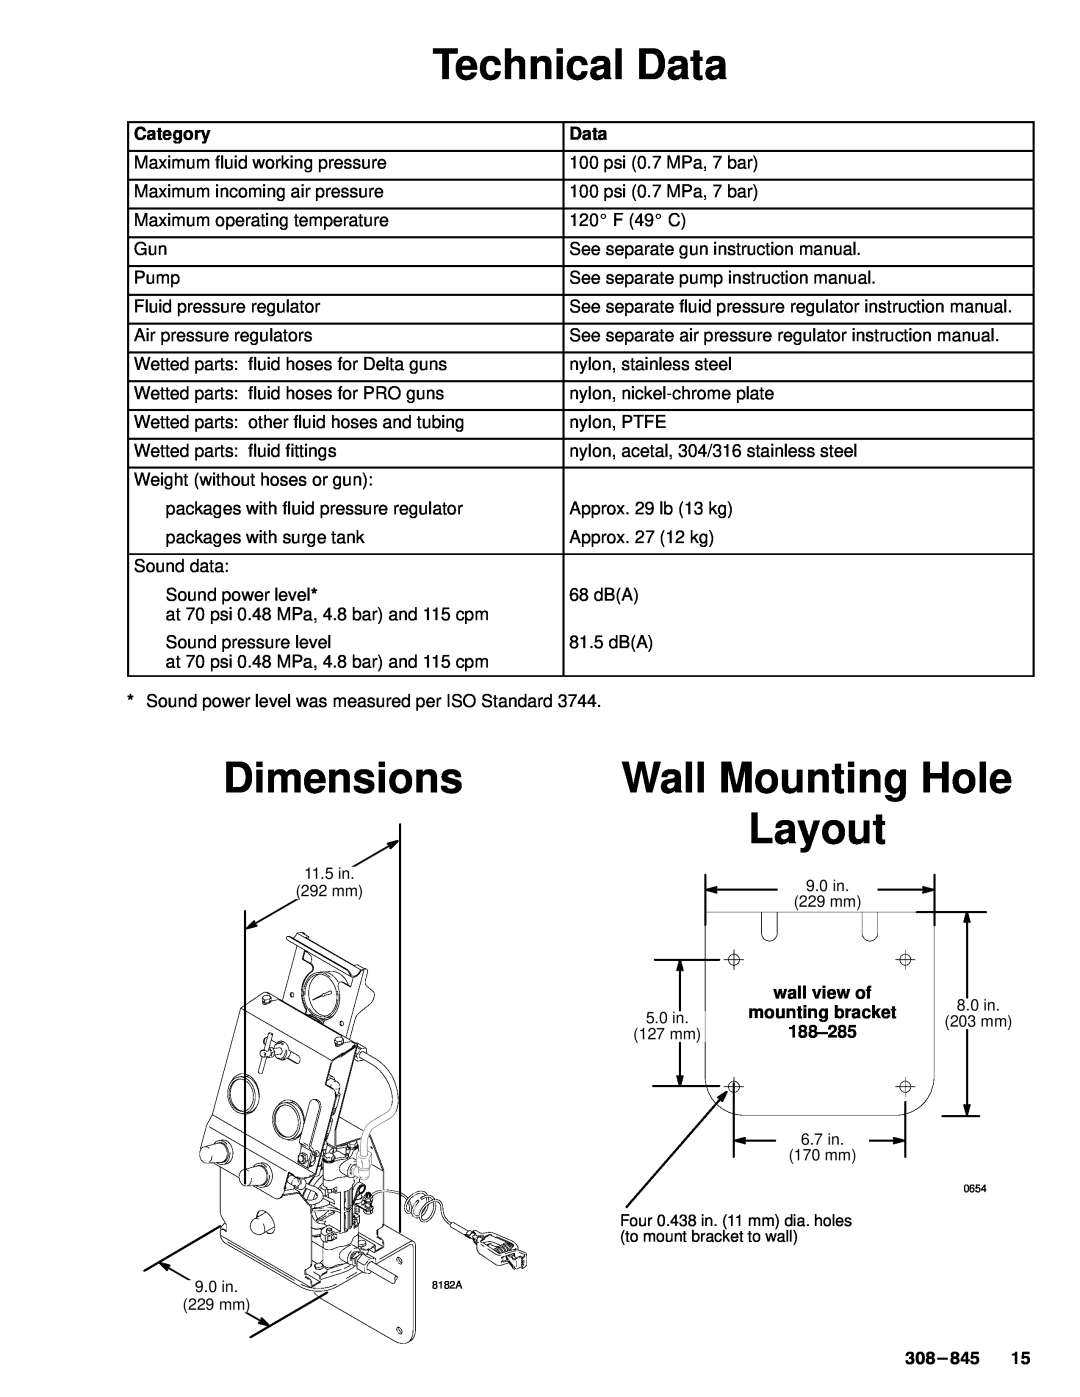 Hitachi 240353 Technical Data, Dimensions, Wall Mounting Hole Layout, Category, wall view of, mounting bracket, 188-285 